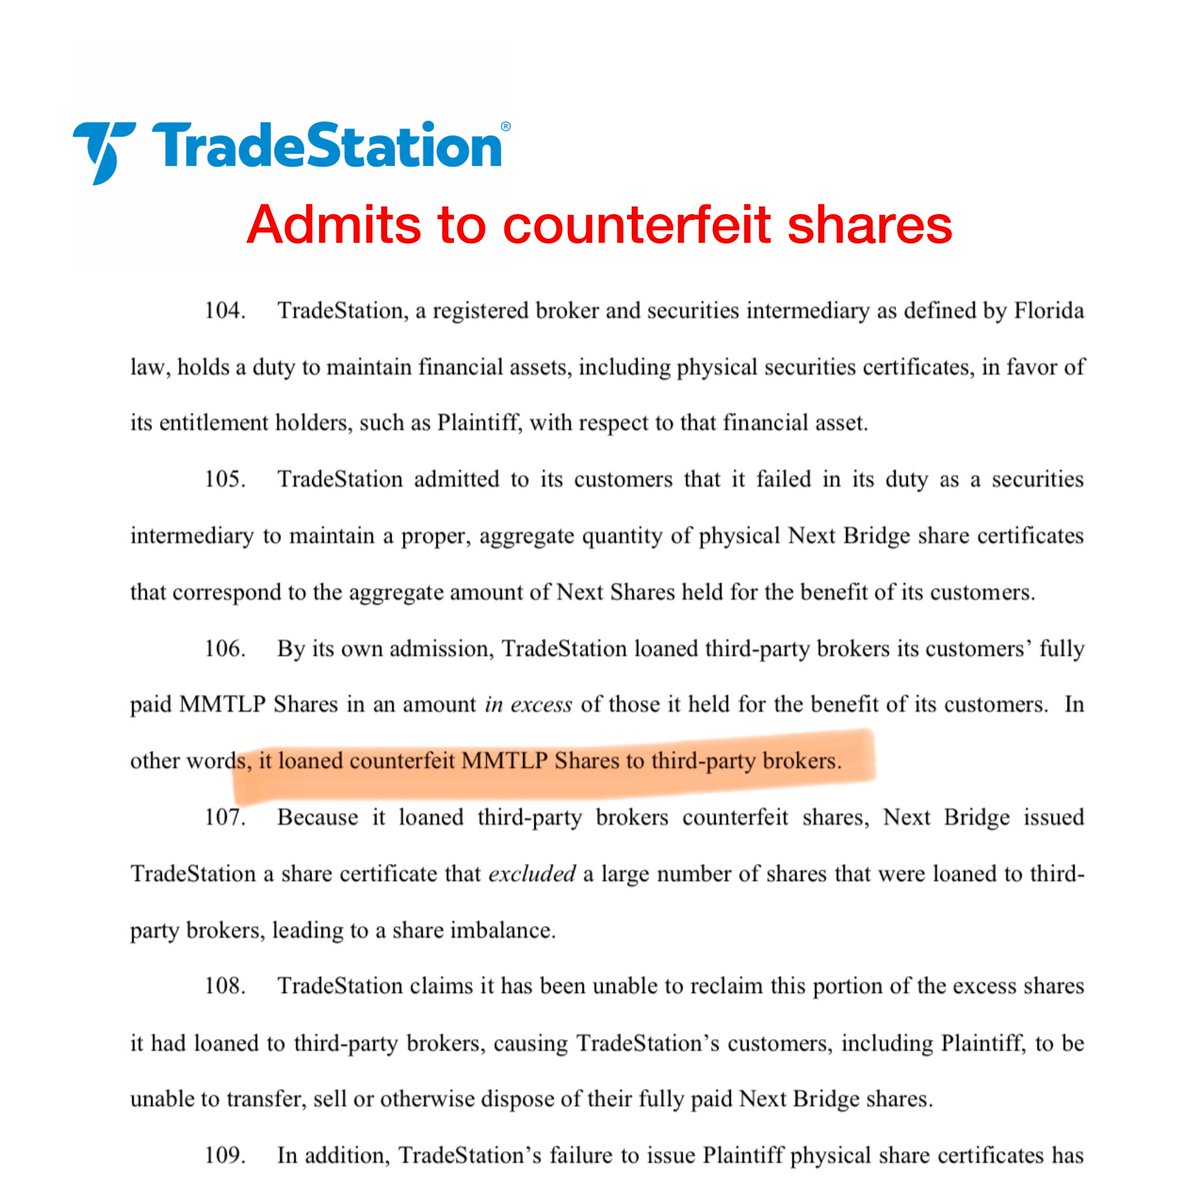 RICO LAWSUIT AGAINST BROKERAGE FIRM TRADESTATION 🚨

TradeStation allegedly profited from selling their customers “COUNTERFEIT SHARES” ⏬ RT

TradeStation admits to their customers they no longer have enough shares to transfer over to AST making all shares counterfeit $MMTLP